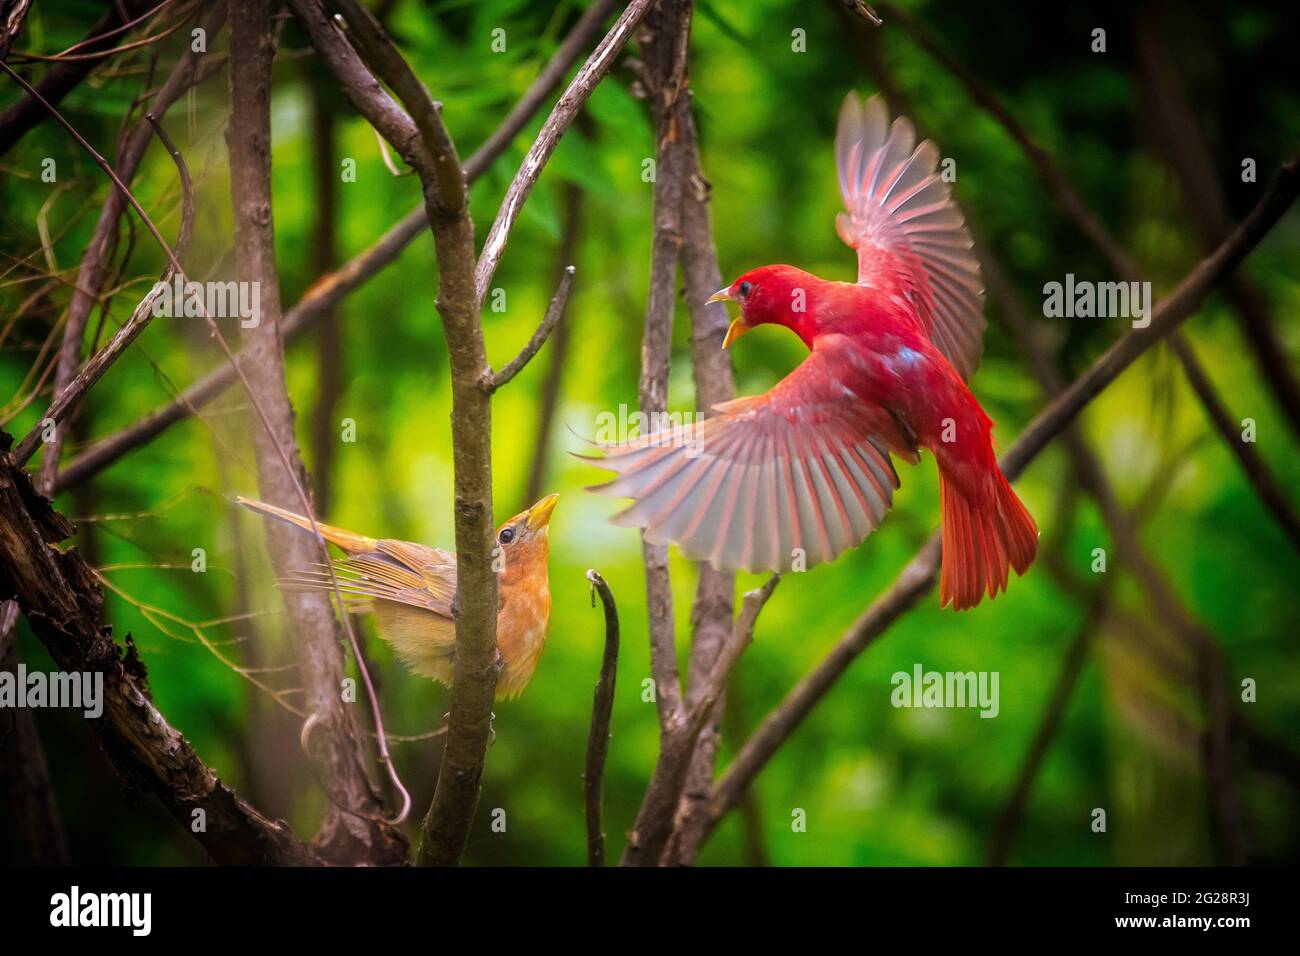 A pair of summer tanagers are having an argument in a thicket.  The male has his wings spread while the female looks up at him.  Red, green, yellow. Stock Photo